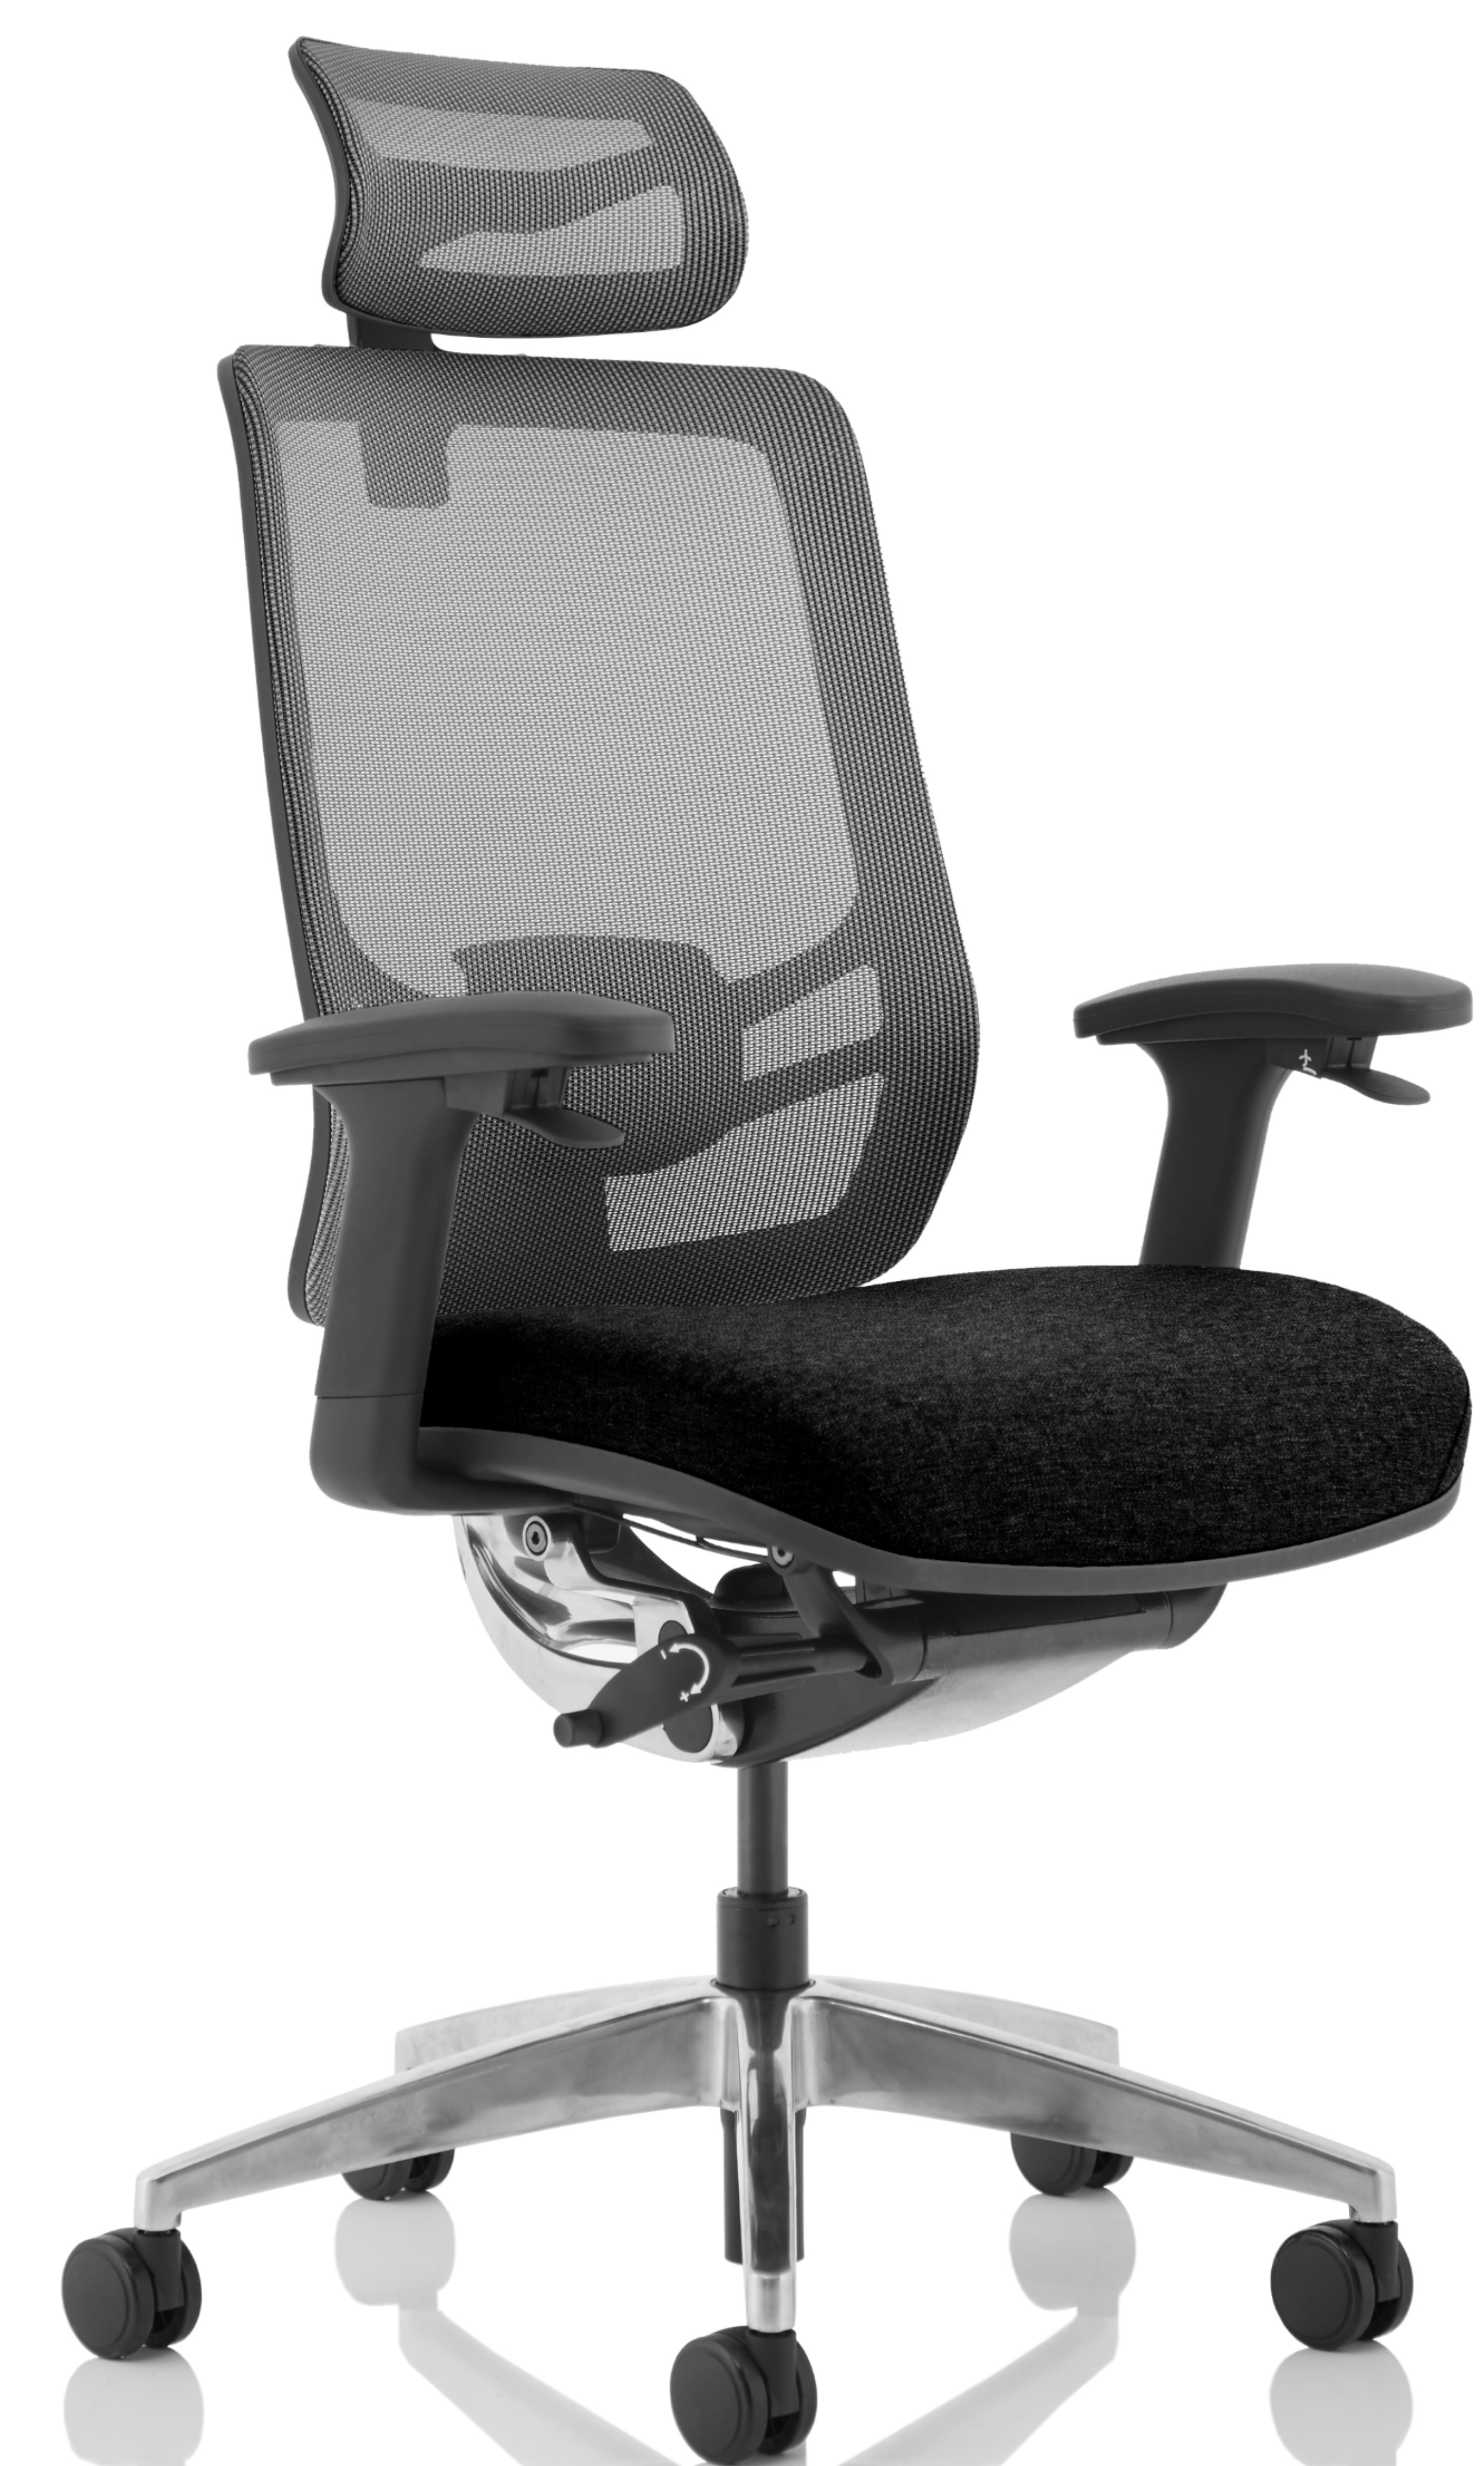 Ergo Click Ergonomic Office Chair With Fabric Seat